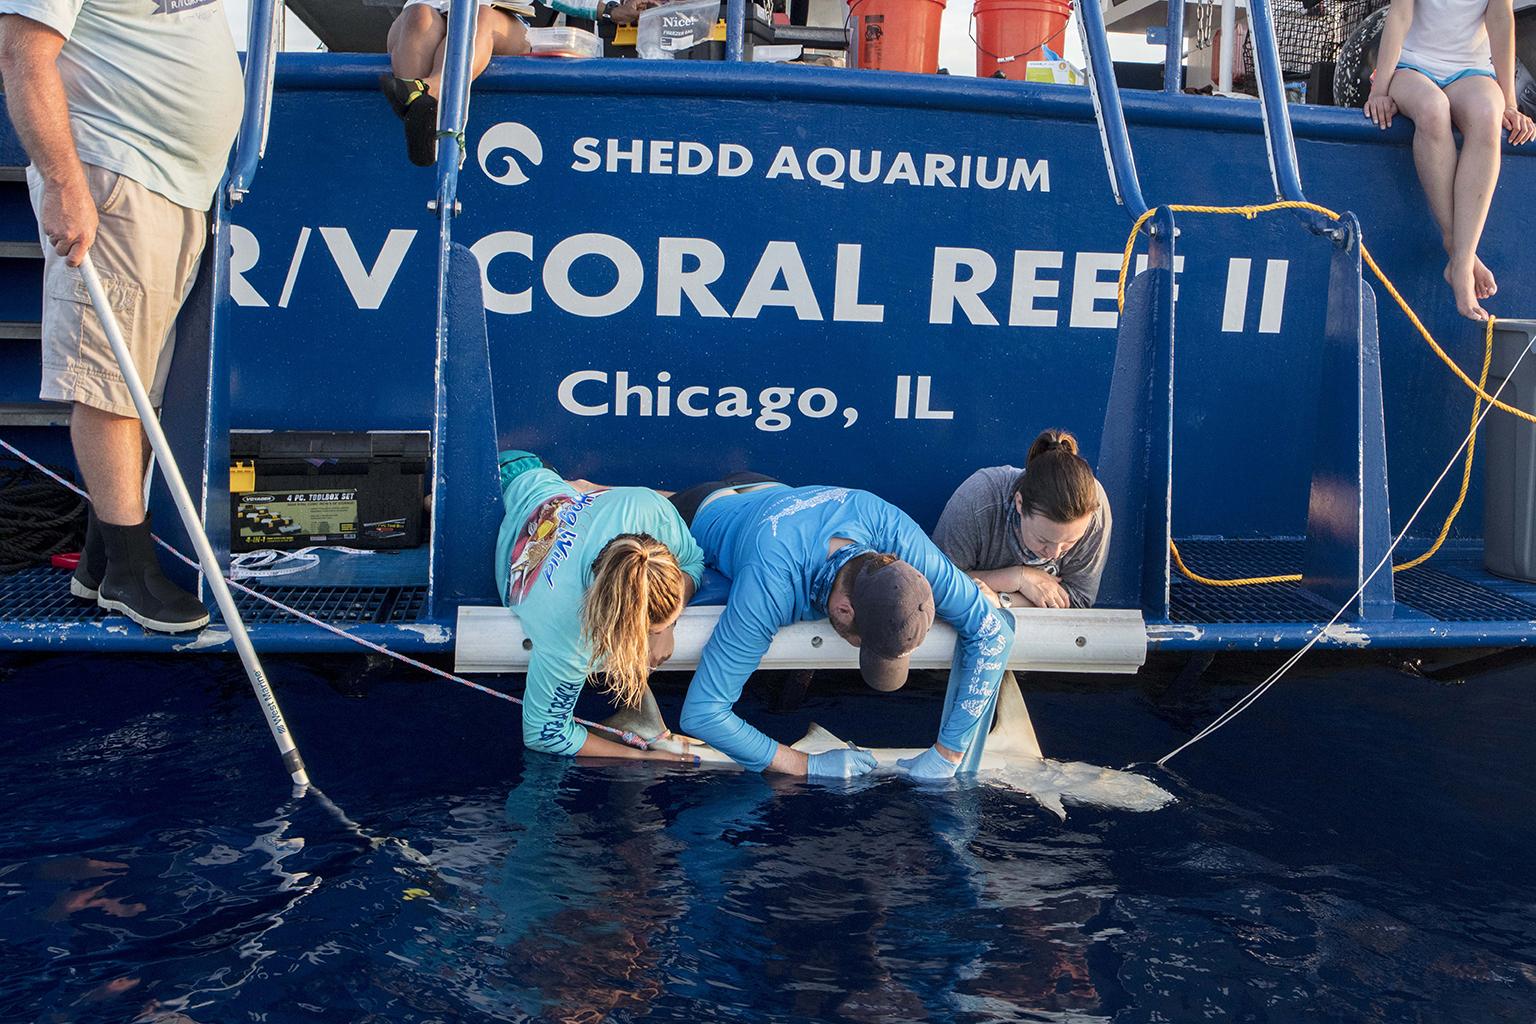 From the back of Shedd Aquarium’s research vessel, the R/V Coral Reef II, Dr. Steve Kessel, middle, collects tissue samples from a Caribbean reef shark (Carcharhinus perezii) alongside two field research assistants, Abby Nease, left, and Jill Brooks. (Courtesy Shedd Aquarium)